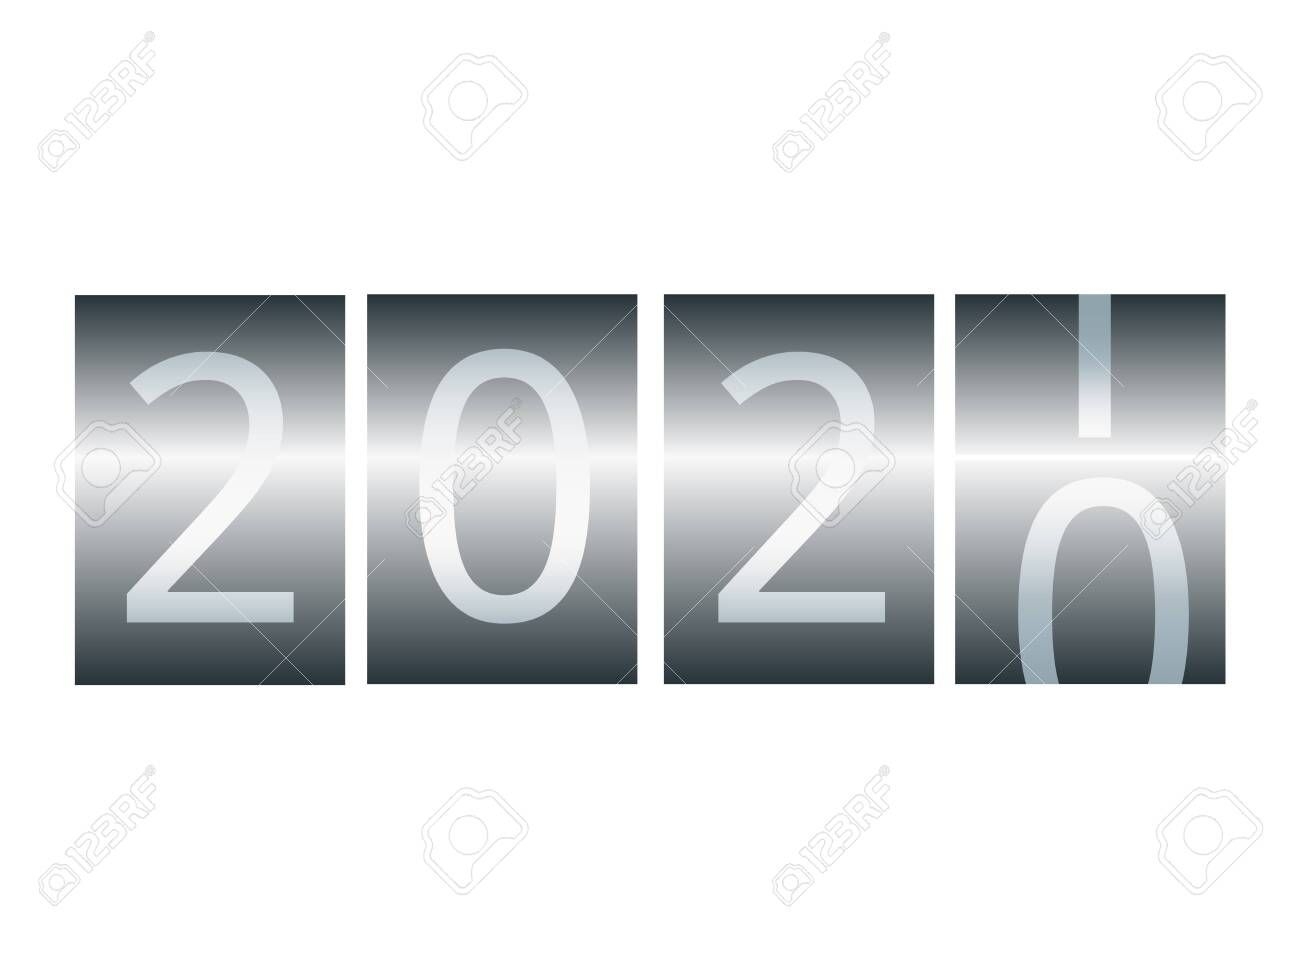 New Year Counter. Calendar For 2020-2021, Stylized As A Taxi..